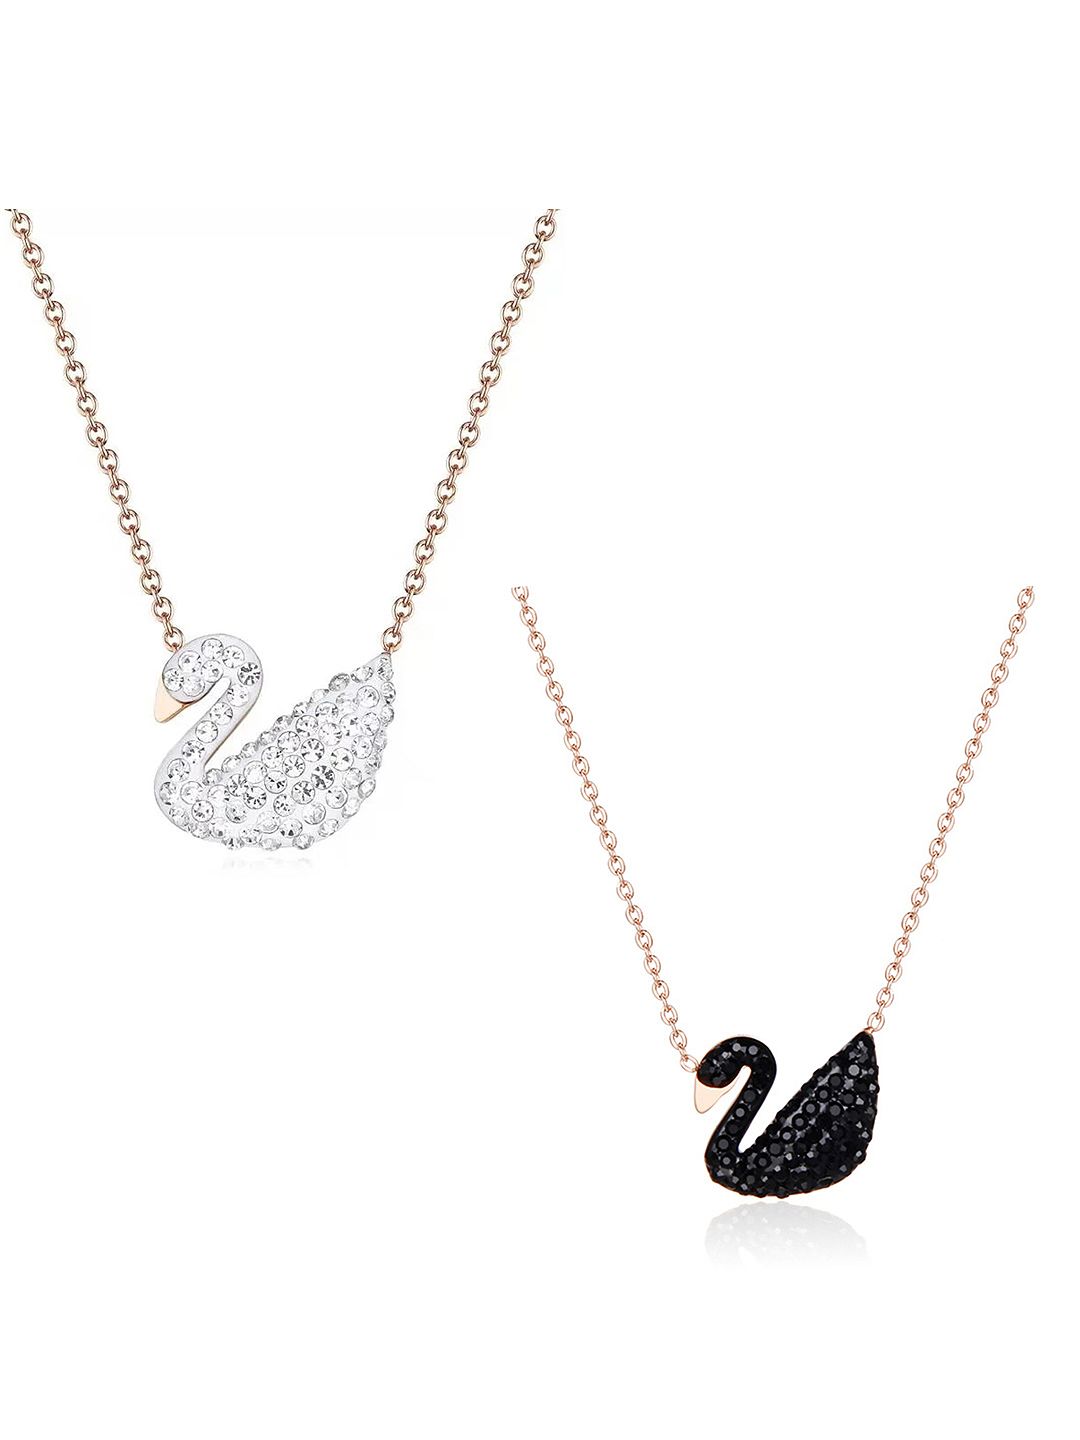 Vembley Set Of 2 Gold-Plated & White Swan Pendant Necklace Price in India